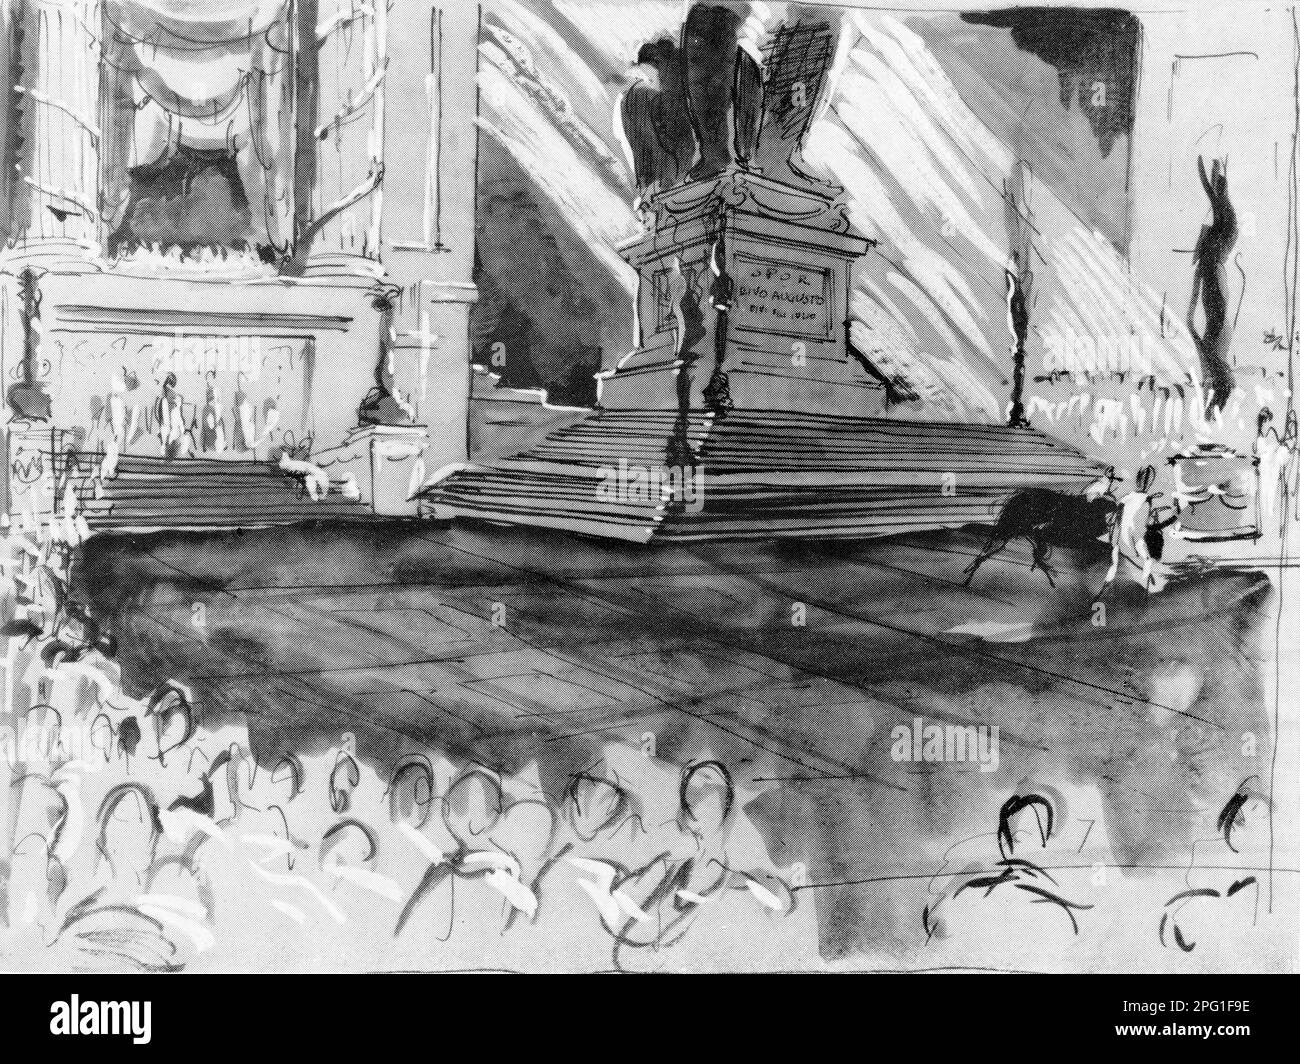 Concept Art / Set Design by Art Director VINCENT KORDA for the uncompleted film CHARLES LAUGHTON and MERLE OBERON in I, CLAUDIUS 1937 director JOSEF von STERNBERG book Robert Graves producer Alexander Korda London Film Productions Stock Photo